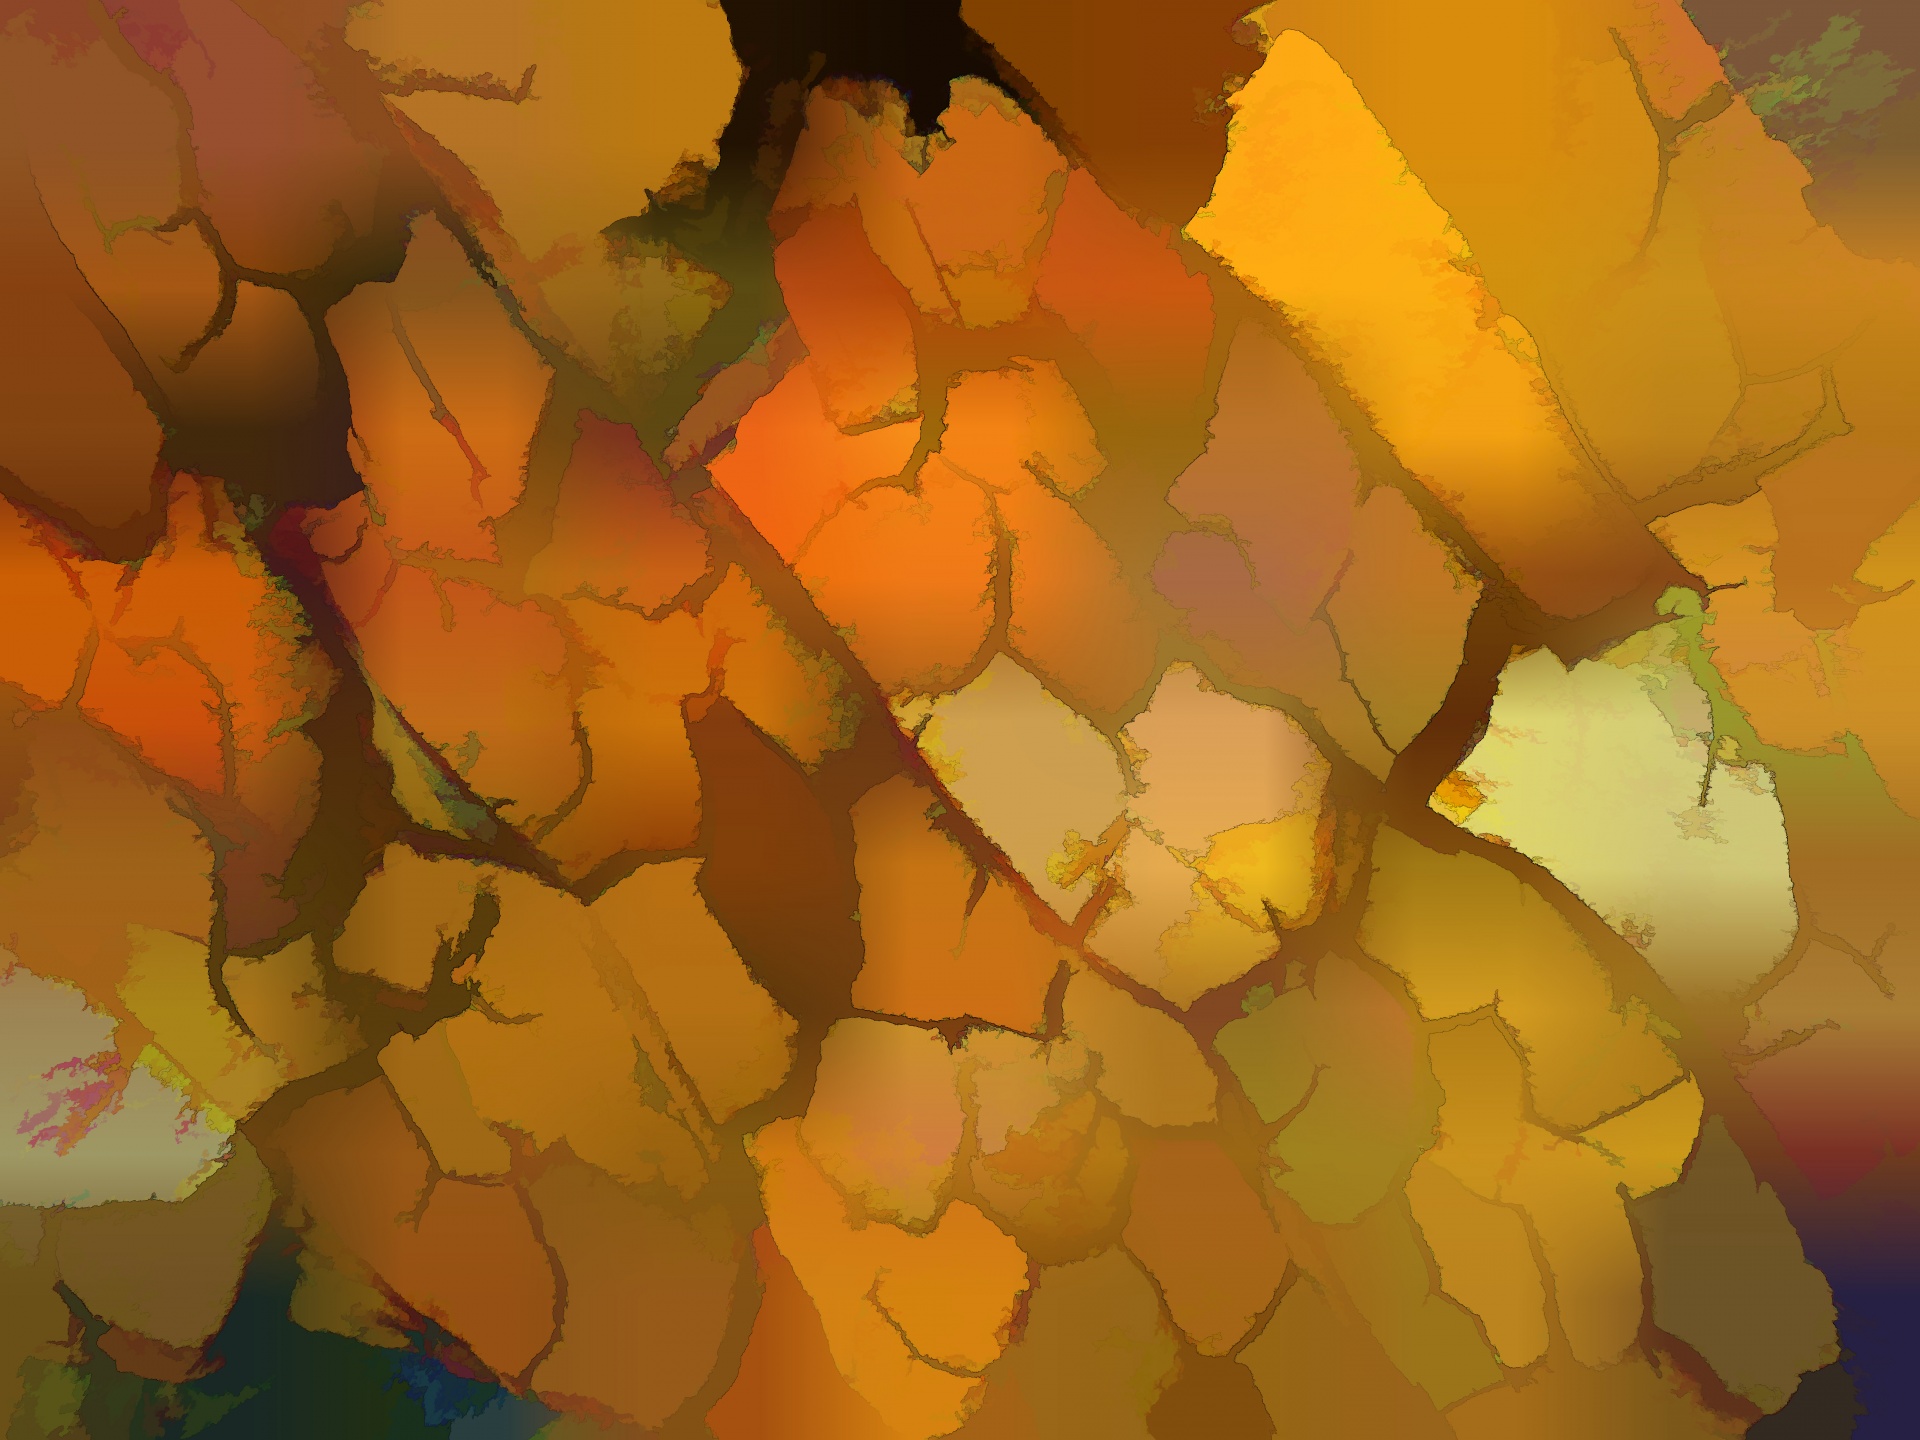 Background, wallpaper, abstract, autumn, fall colors